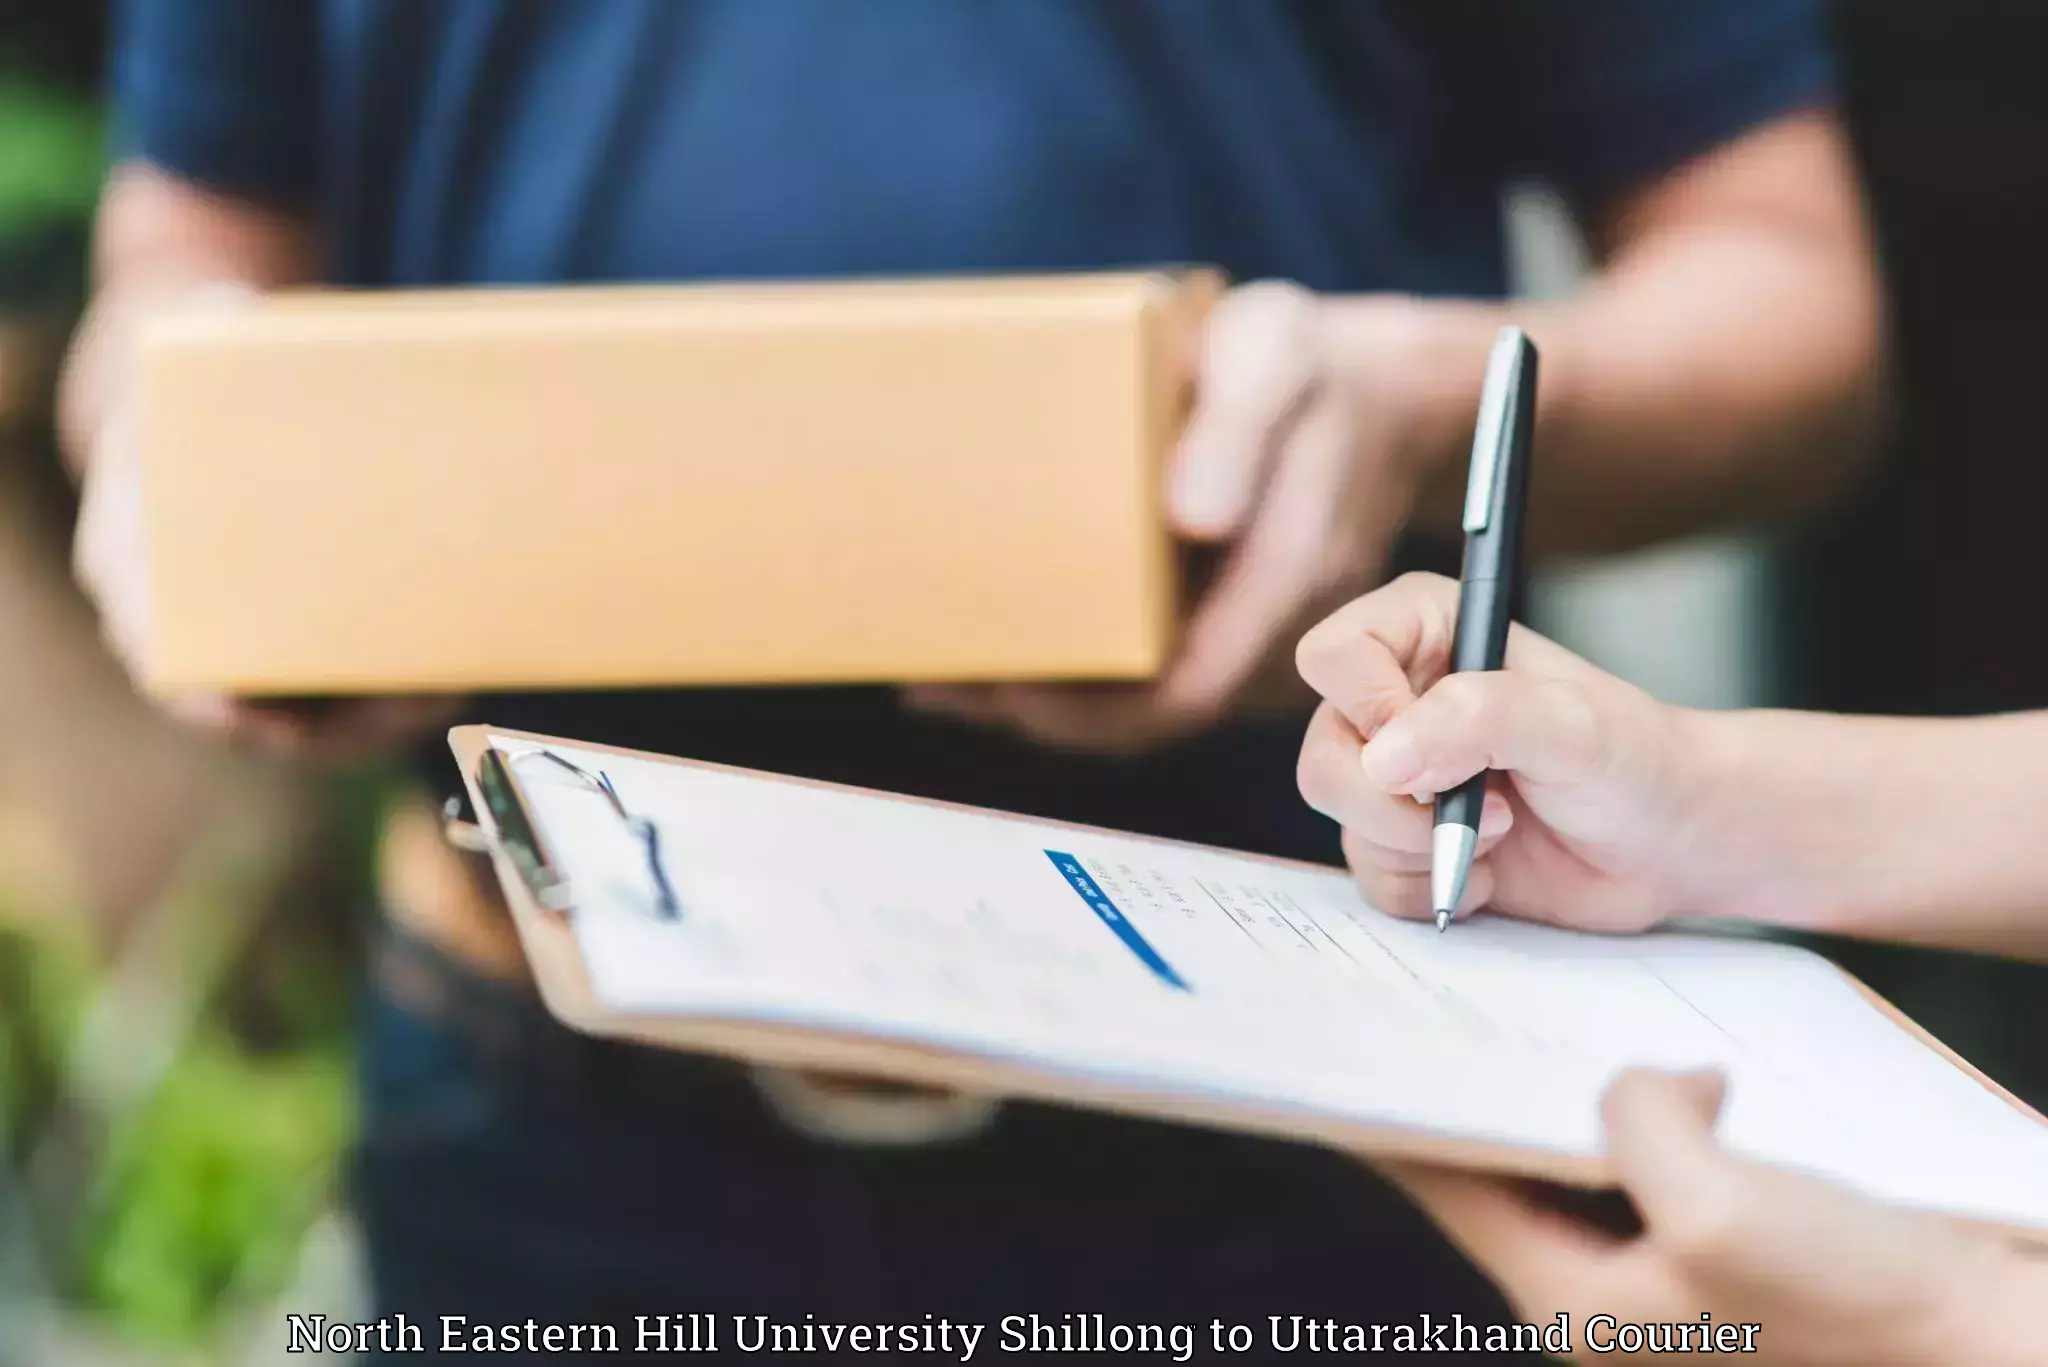 Reliable movers North Eastern Hill University Shillong to Doiwala